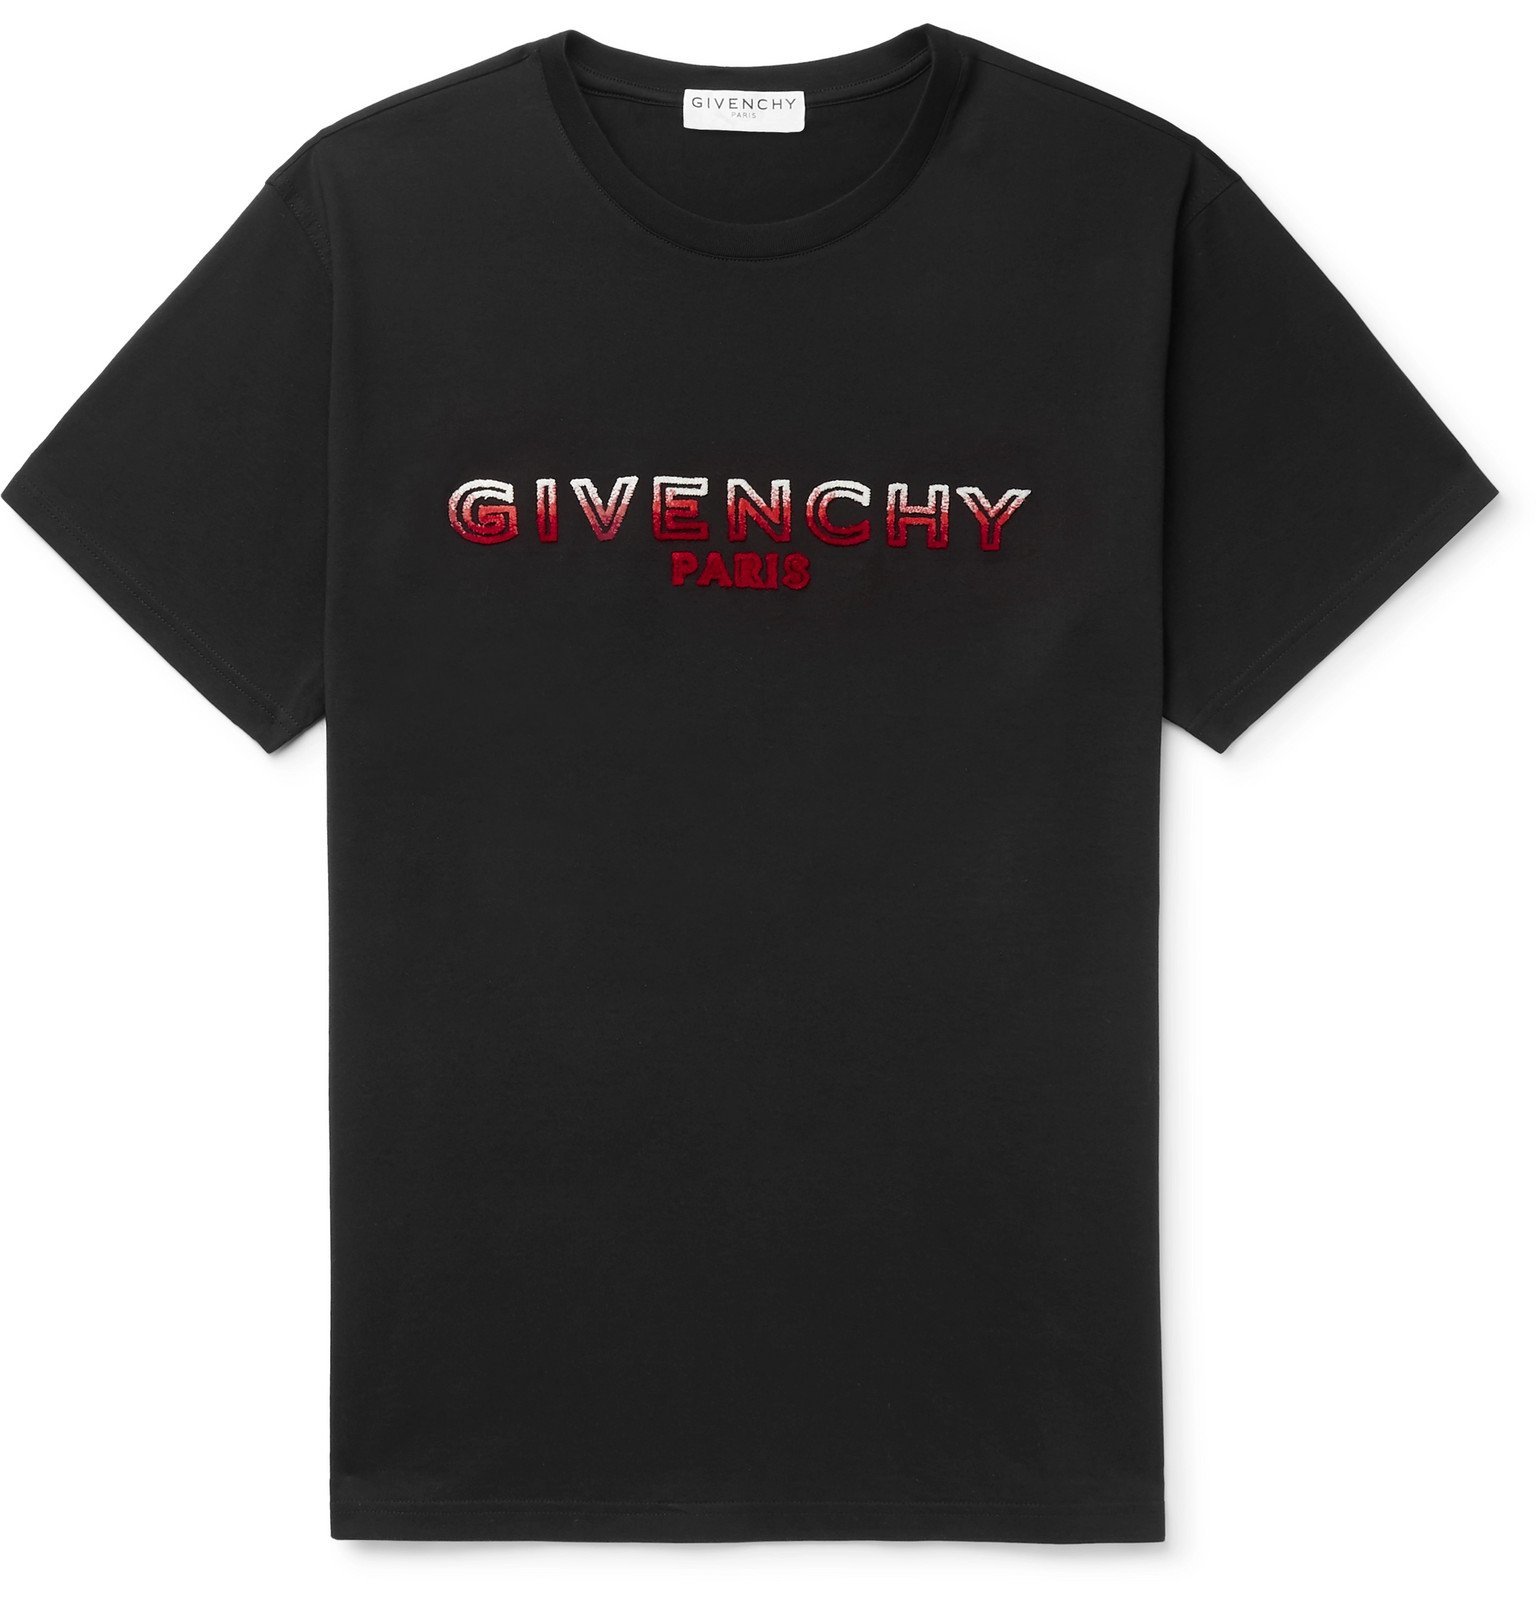 Givenchy - Slim-Fit Logo-Flocked Cotton-Jersey T-Shirt - Black Givenchy